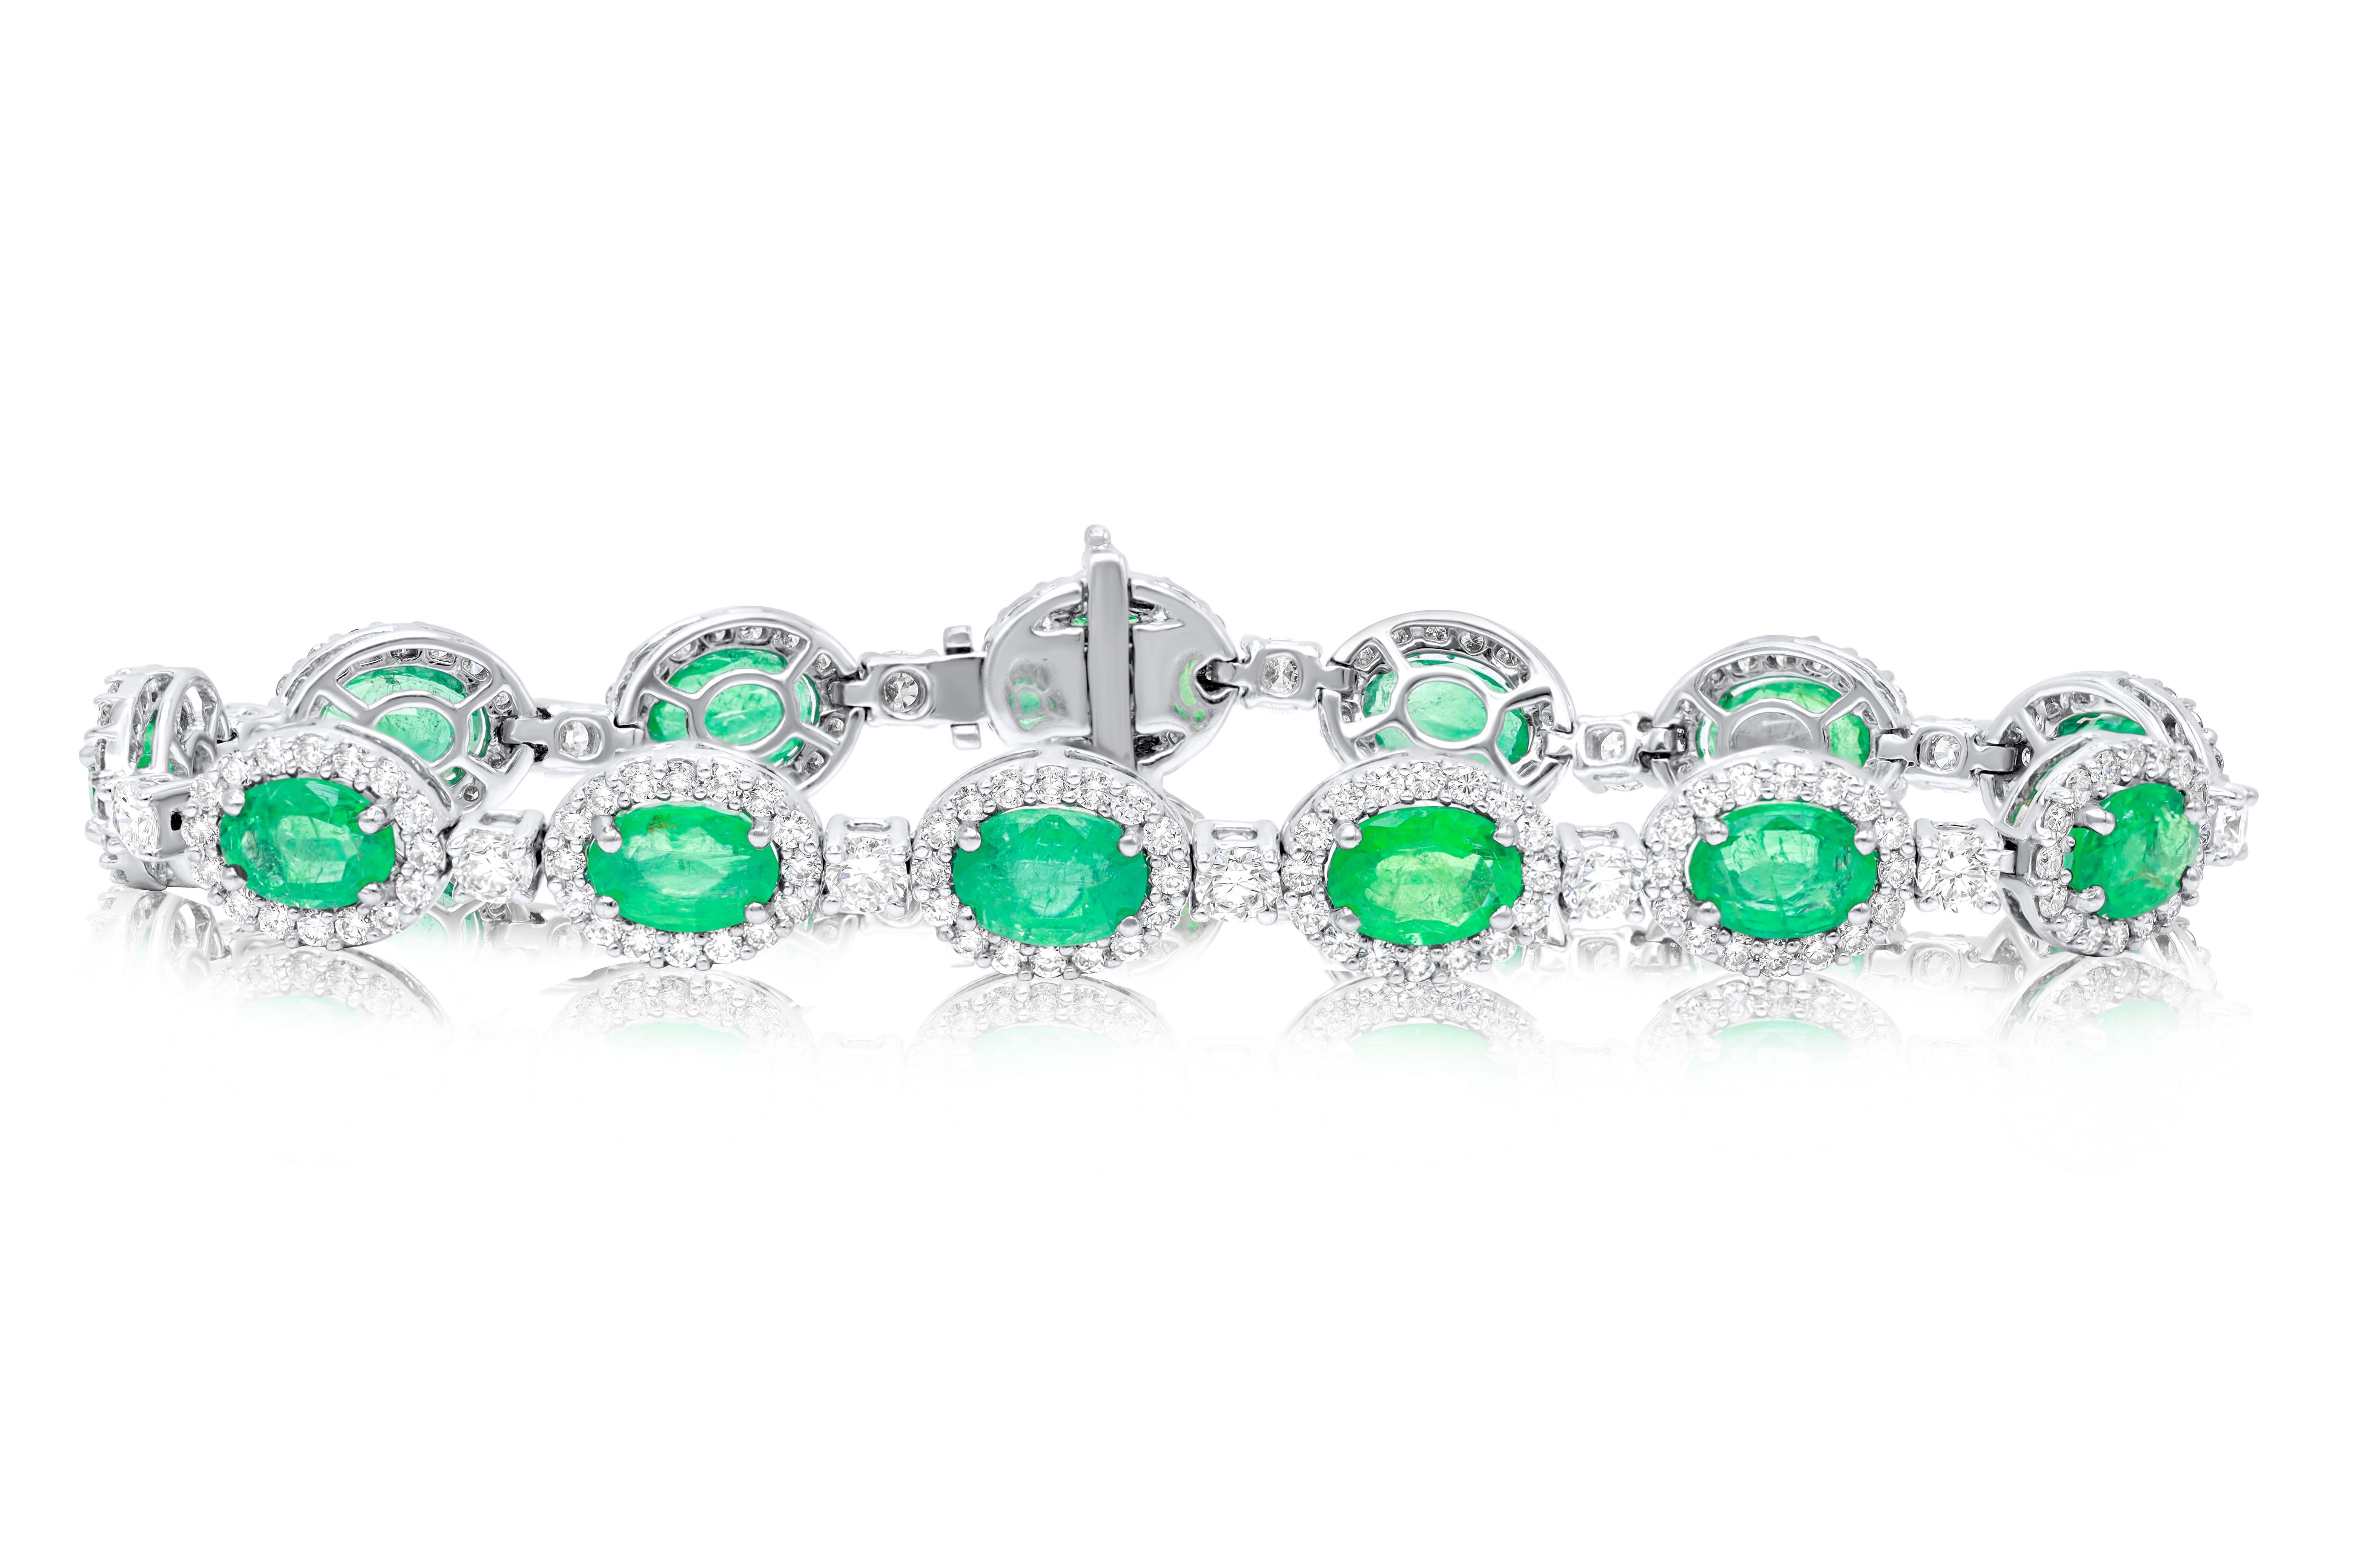 18 kt white gold bracelet adorned with 9.57 cts tw of oval cut emeralds surrounded and separated by 4.08 cts tw of diamonds